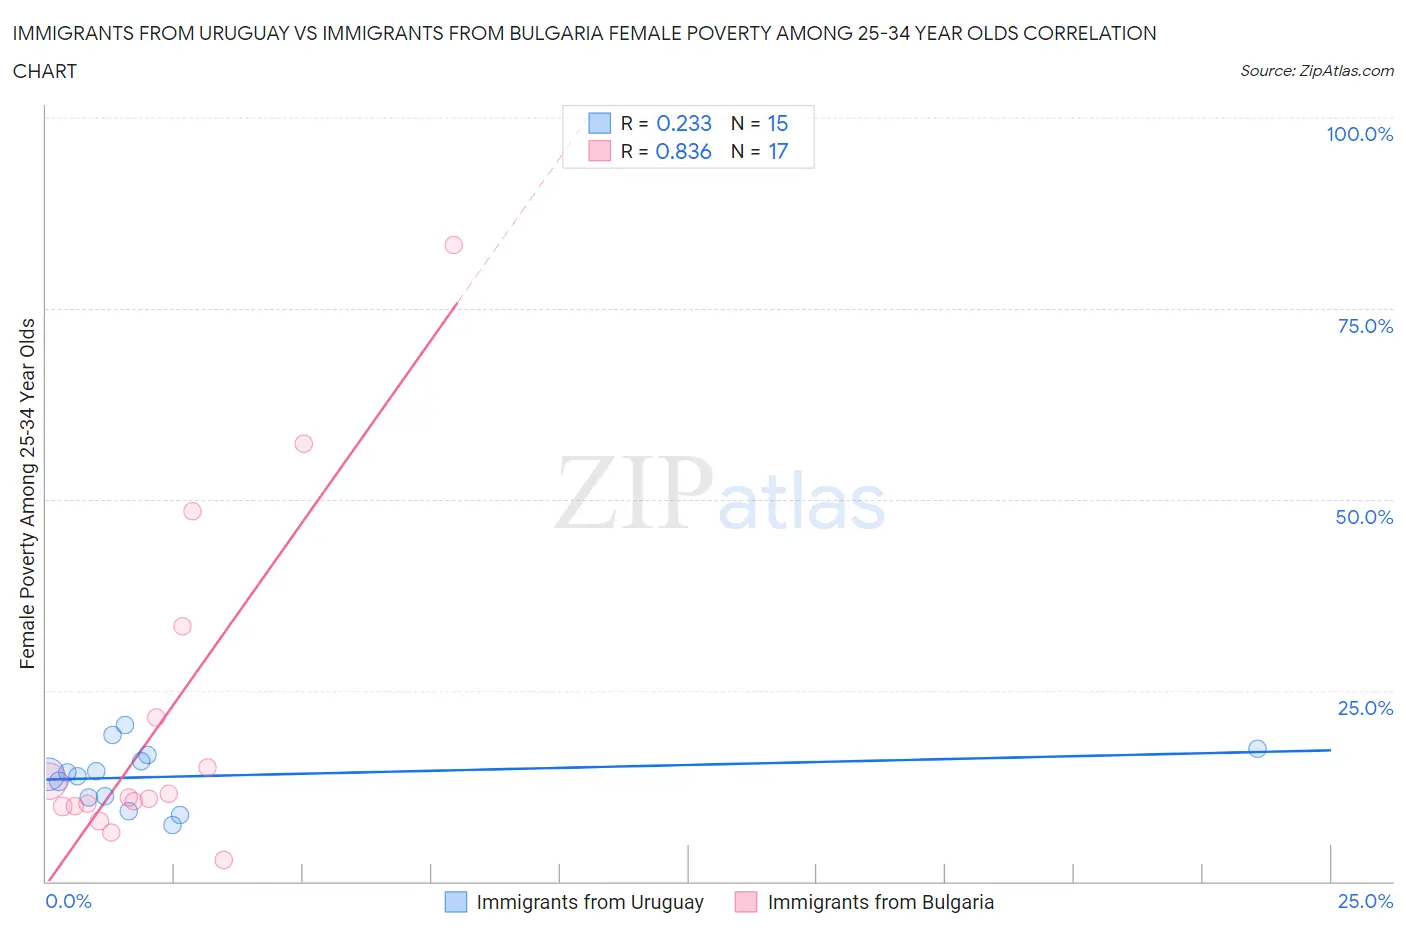 Immigrants from Uruguay vs Immigrants from Bulgaria Female Poverty Among 25-34 Year Olds